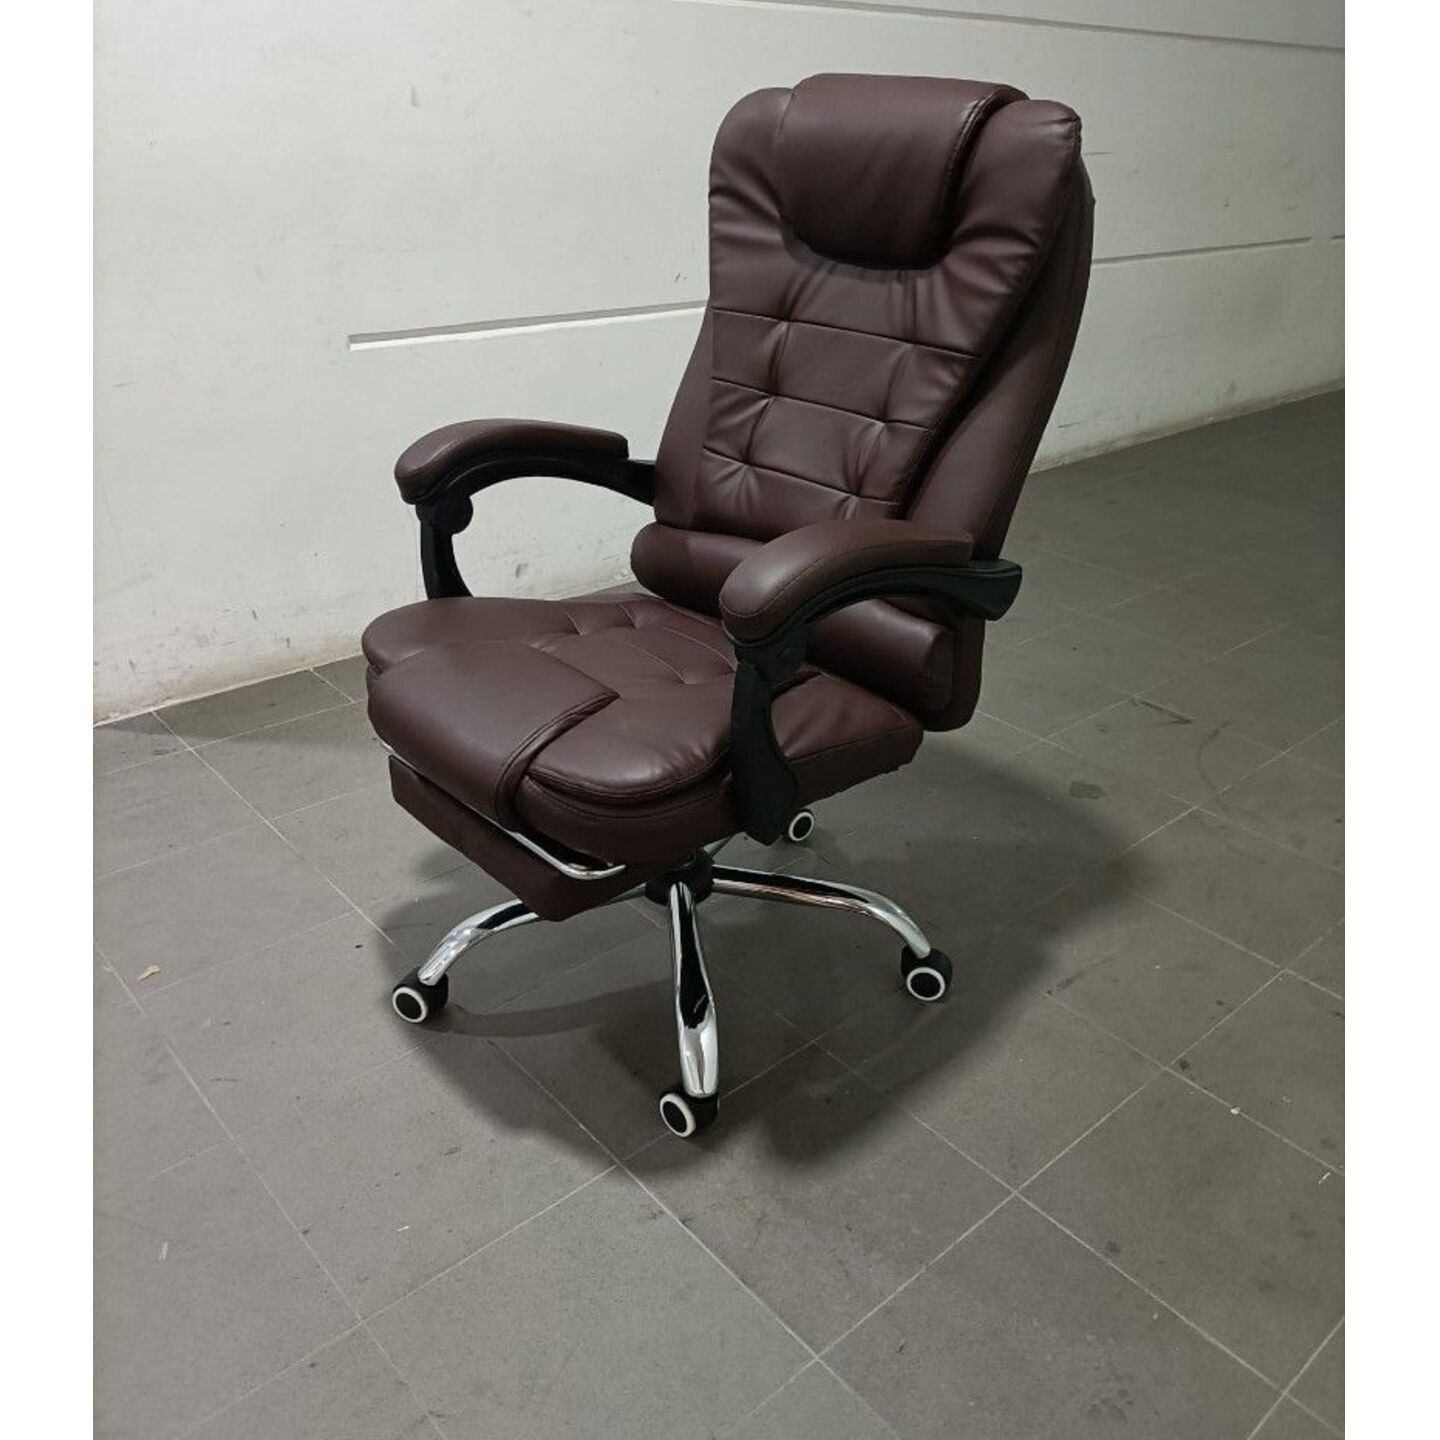 VADARMO Office Chair in BROWN